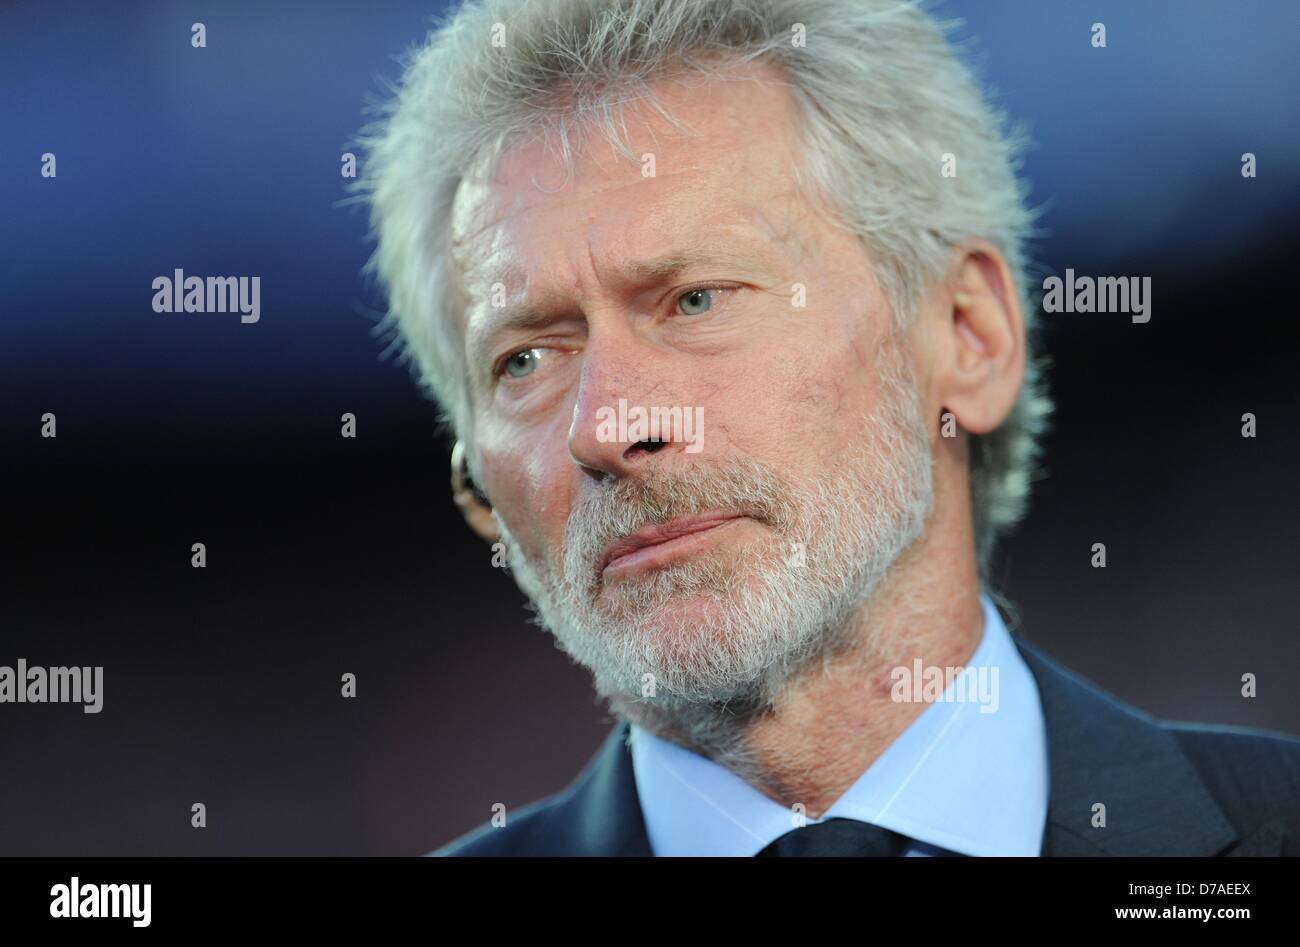 Barcelona, Spain. 1st May 2013. Munich's former player Paul Breitner during an interview prior to the UEFA Champions League semi final second leg soccer match between FC Barcelona and FC Bayern Munich at Camp Nou Stadium in Barcelona, Spain, 01 May 2013. Photo: Andreas Gebert/dpa/Alamy Live News Stock Photo